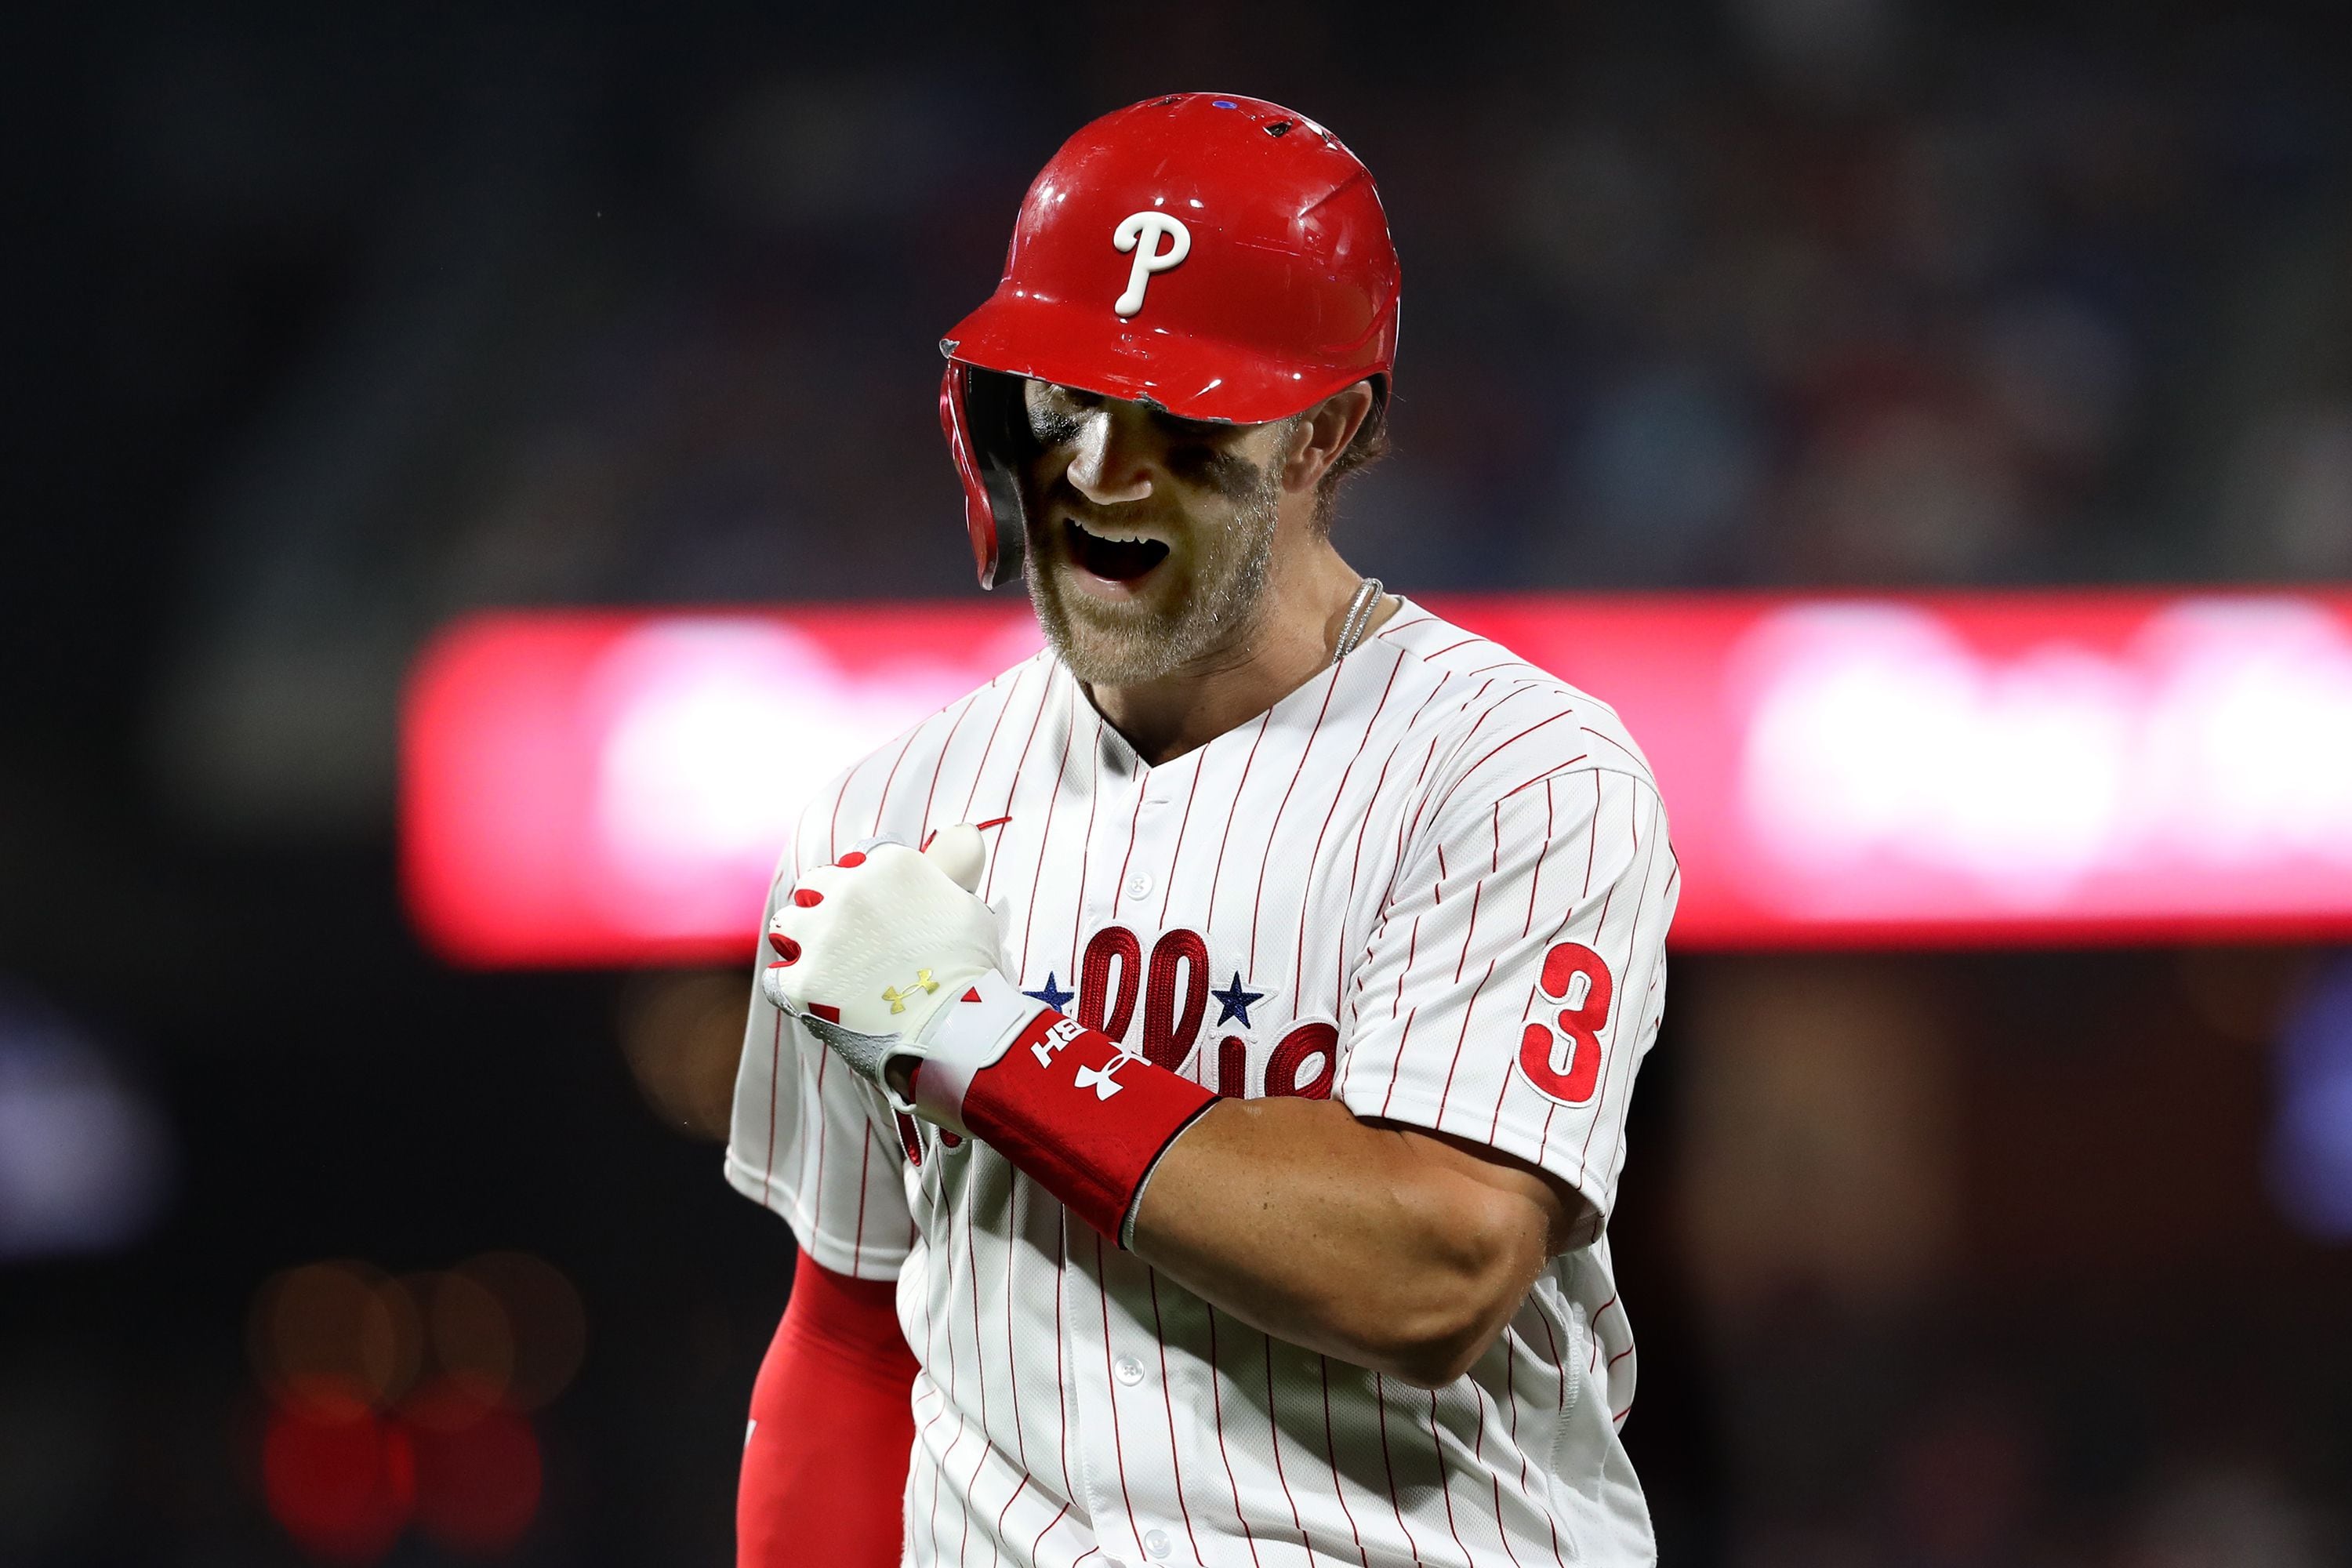 Hoskins' return provides spark as Phillies take 2 of 3 in San